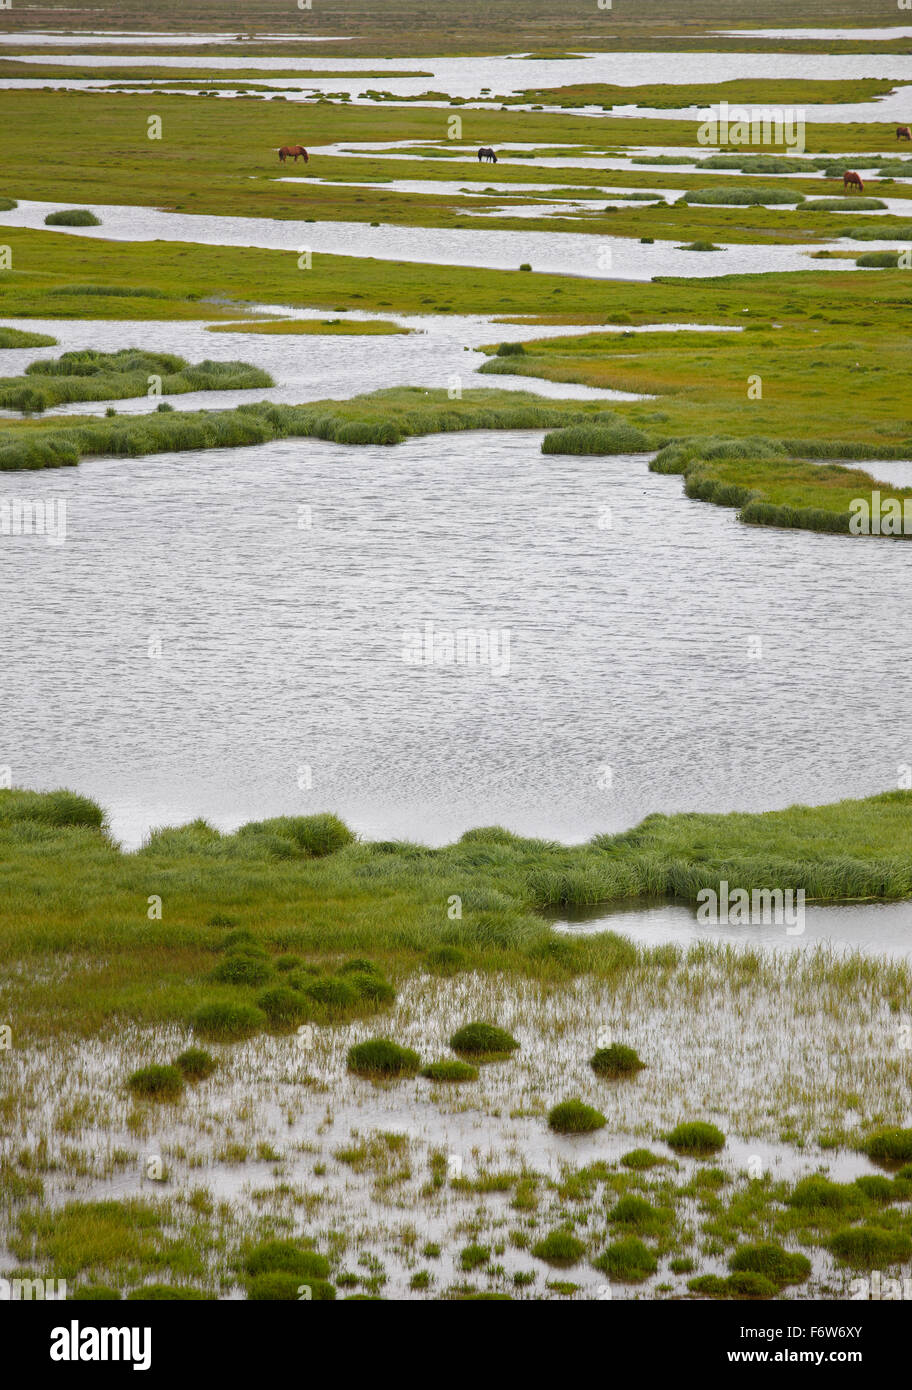 Swampy landscape with lakes grass and horses in North Iceland. Stock Photo